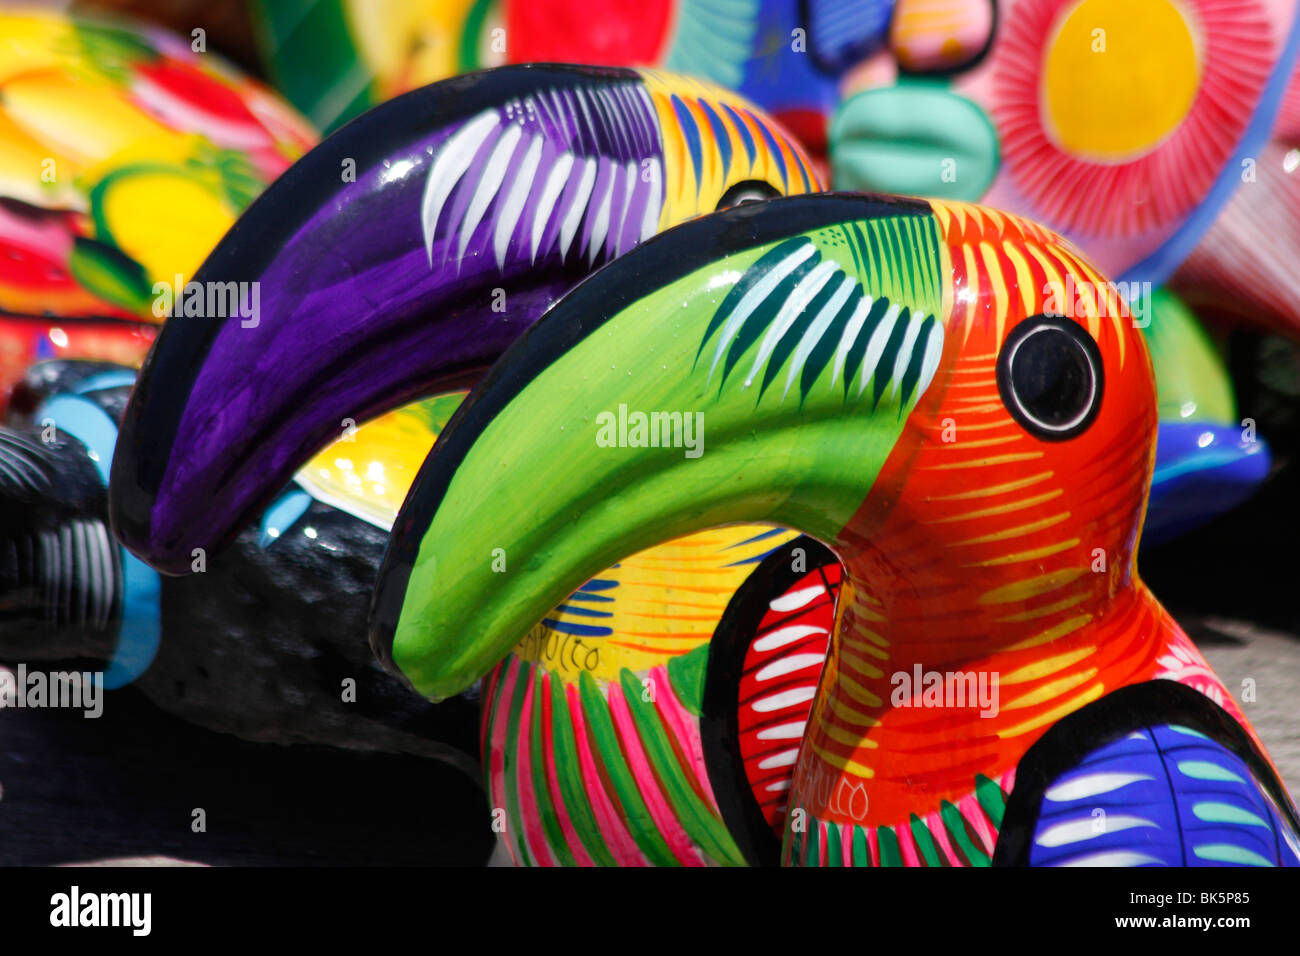 Brightly colored birds and fish souvenirs for tourists in Acapulco Mexico Stock Photo